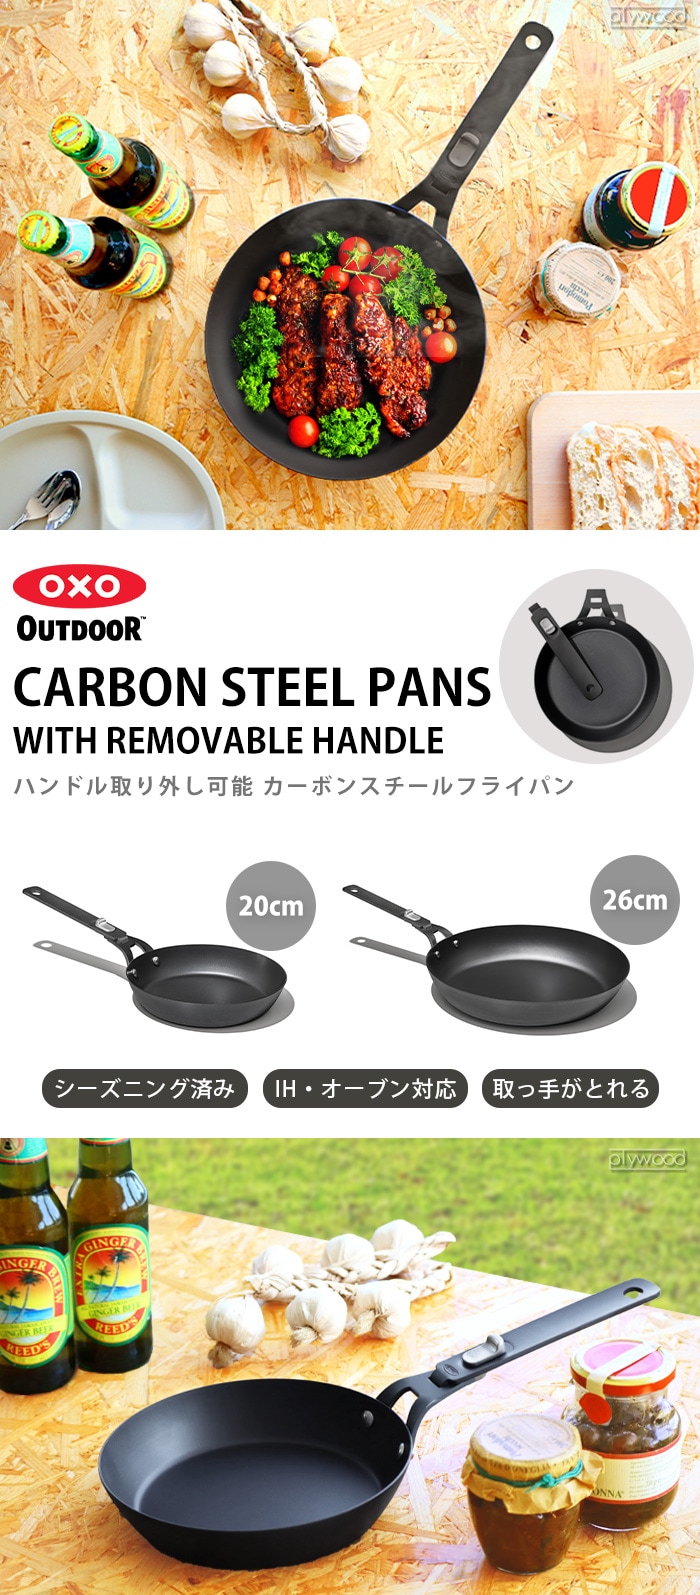 OXO OUTDOOR 8in CARBON STEEL PANS WITH REMOVABLE HANDLE